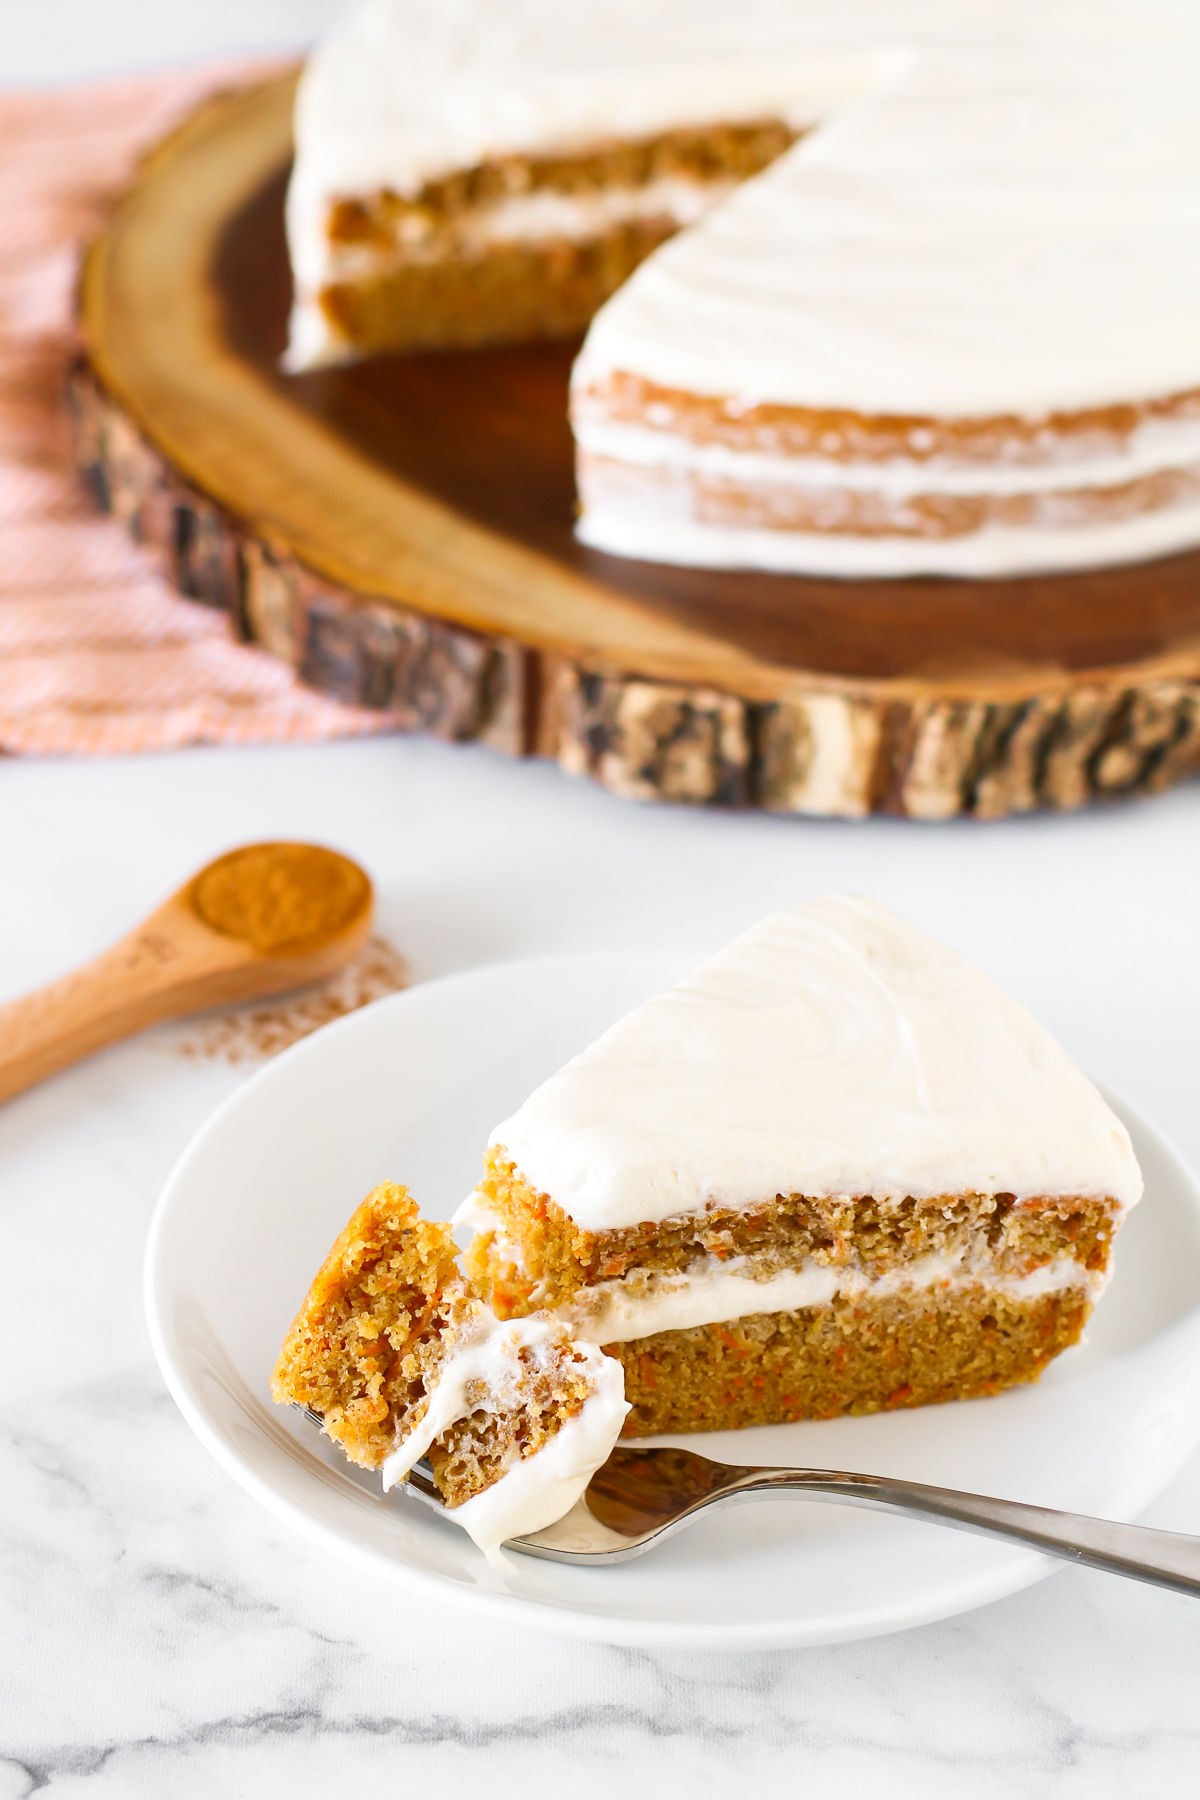 Gluten Free Vegan Carrot Cake. Layers of moist, spiced carrot cake and decadent cream cheese frosting. The classic cake made allergen free!